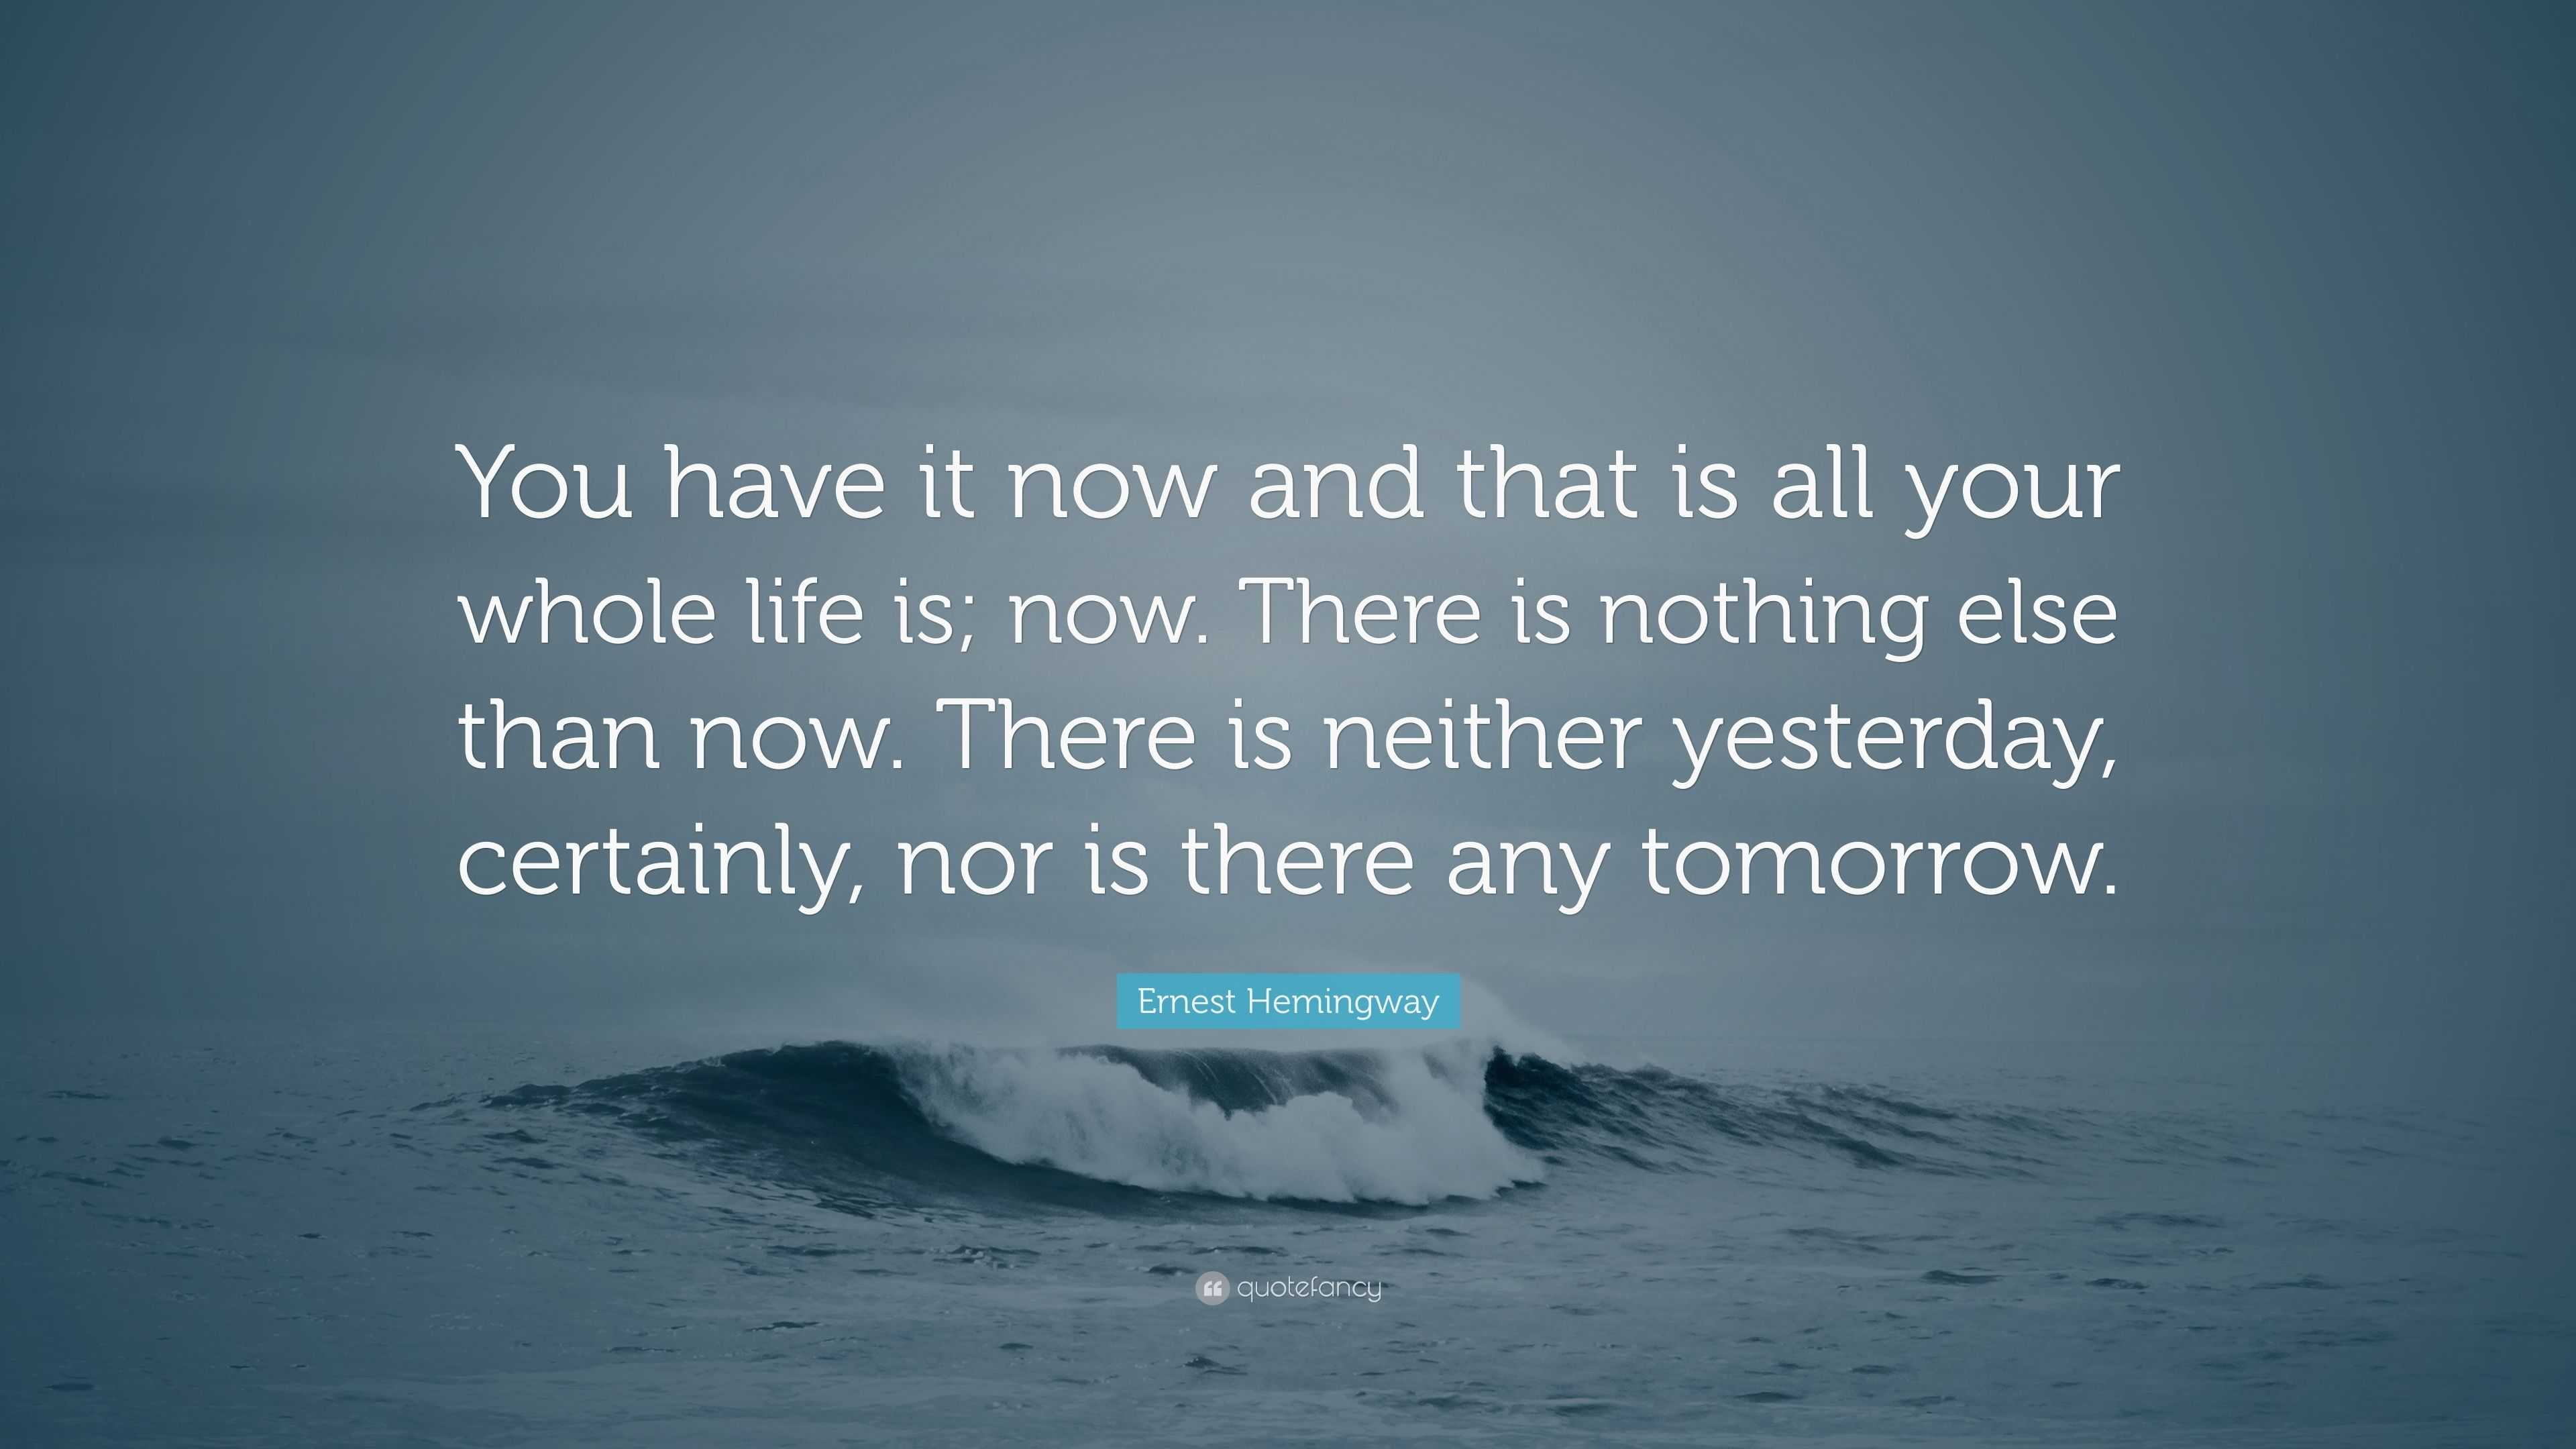 Ernest Hemingway Quote: “You have it now and that is all your whole ...